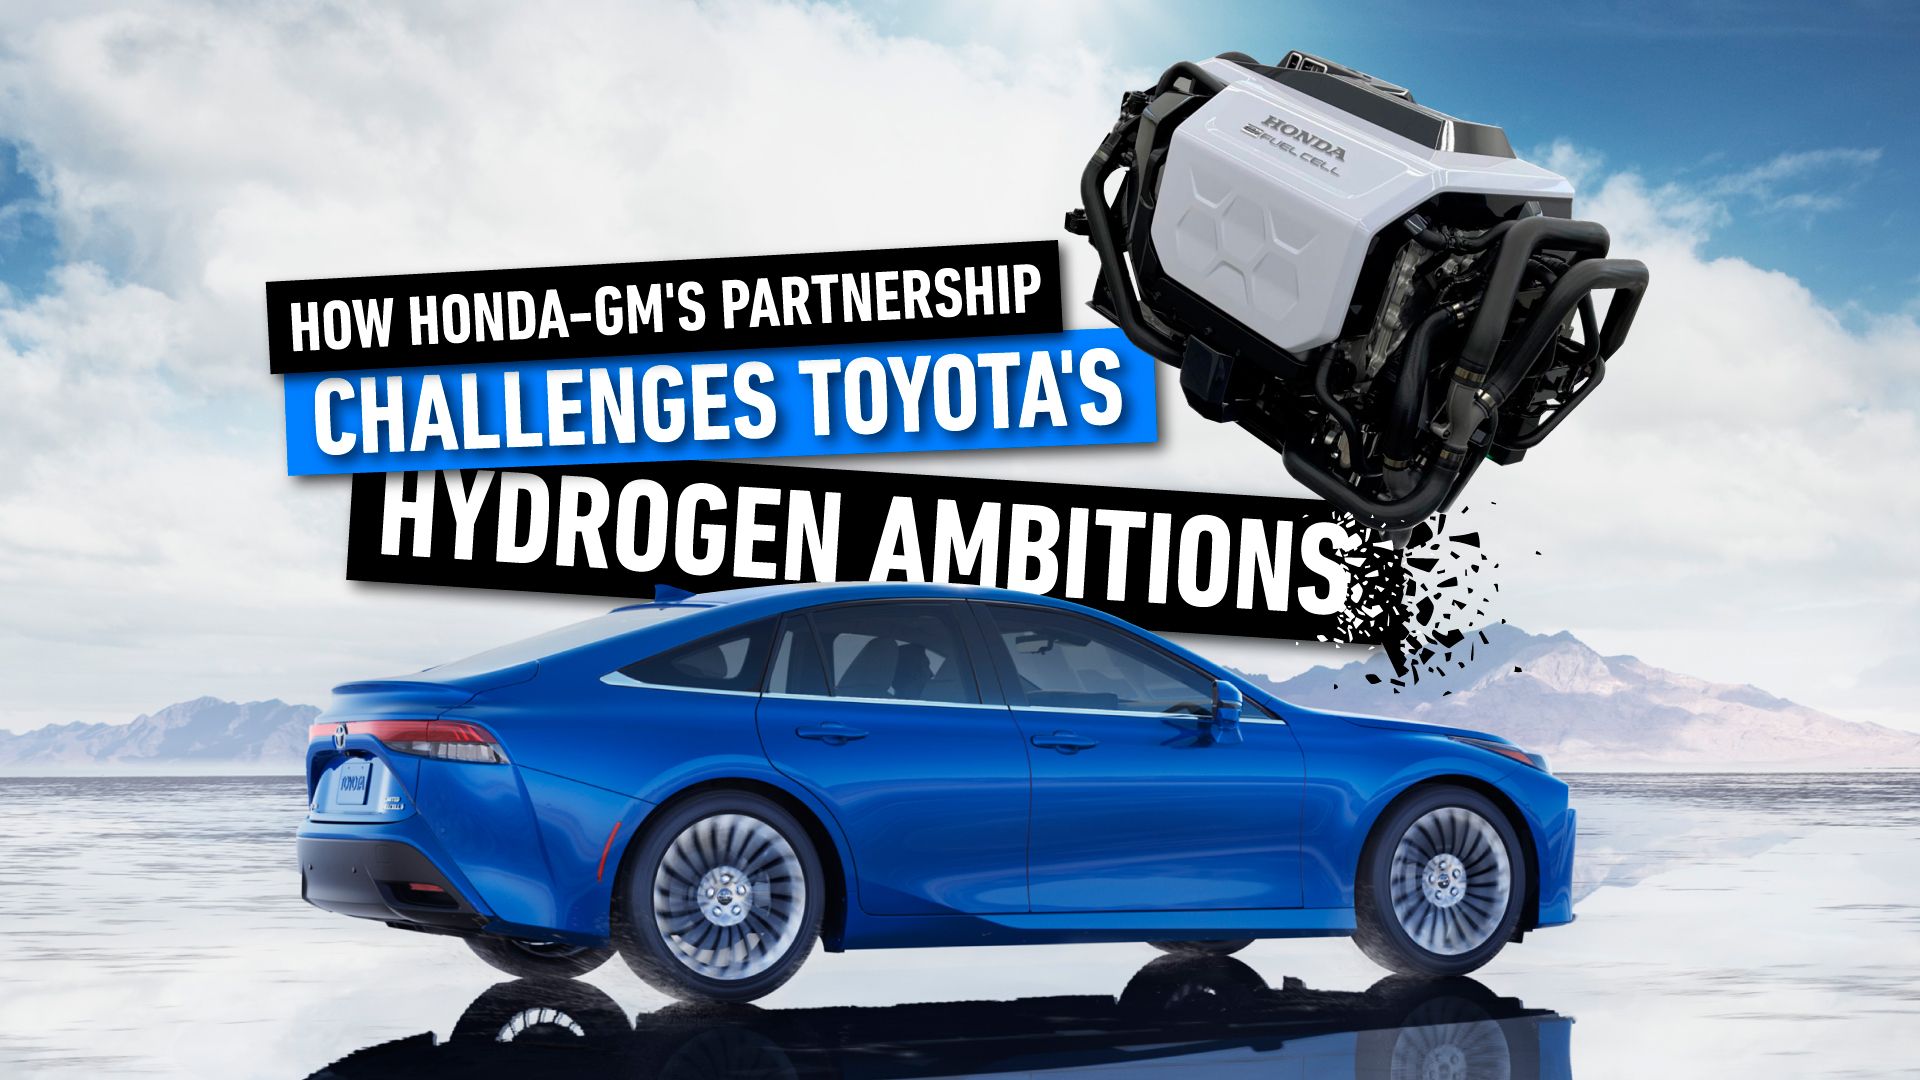 How Honda-GM's Partnership Challenges Toyota's Hydrogen Ambitions